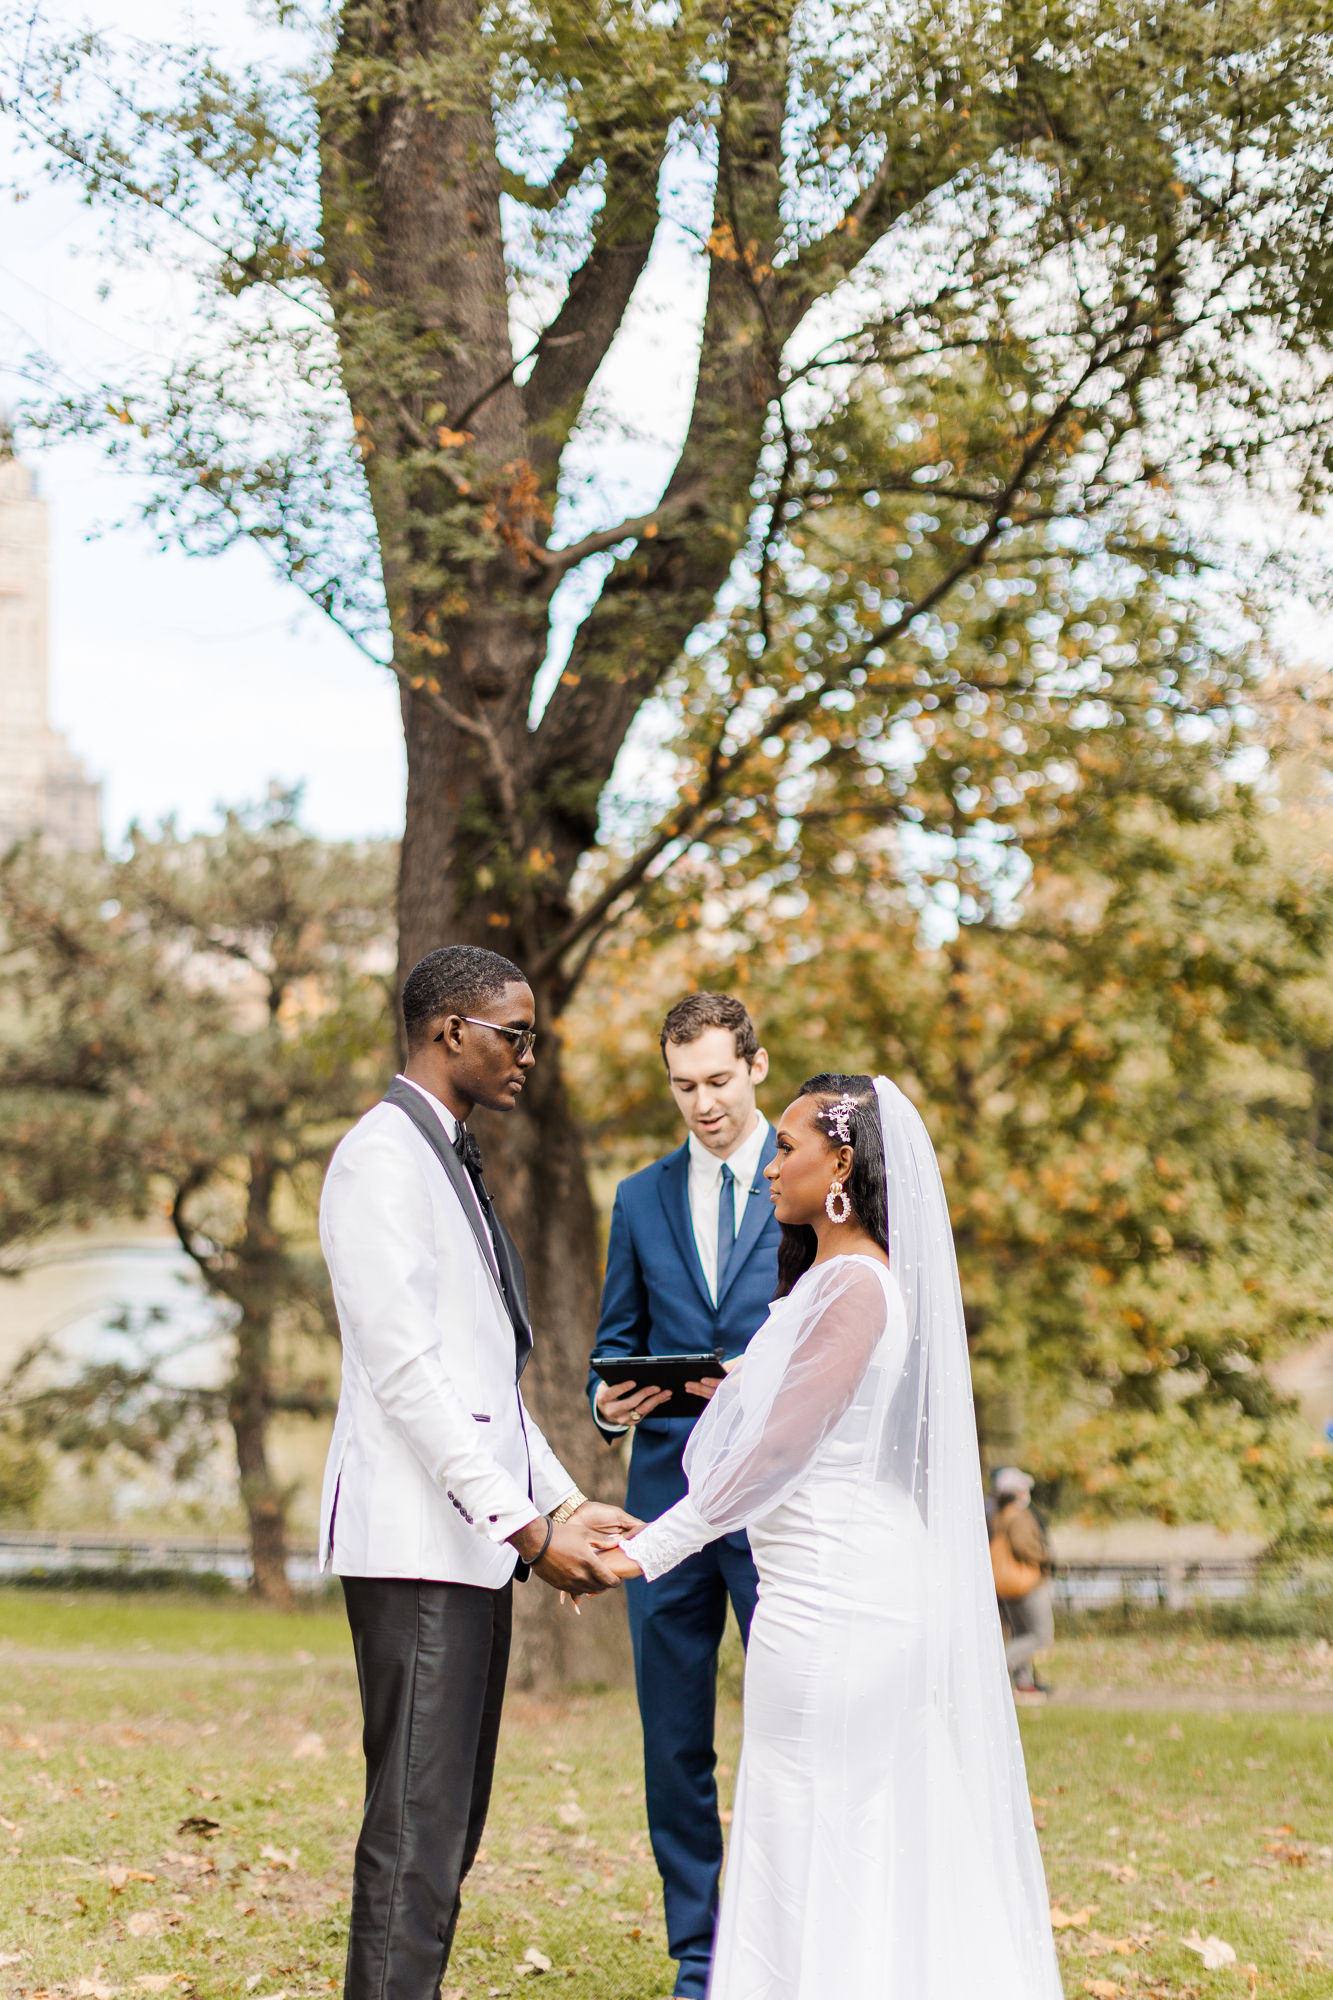 Candid Central Park Wedding Photos on Cherry Hill in Fall